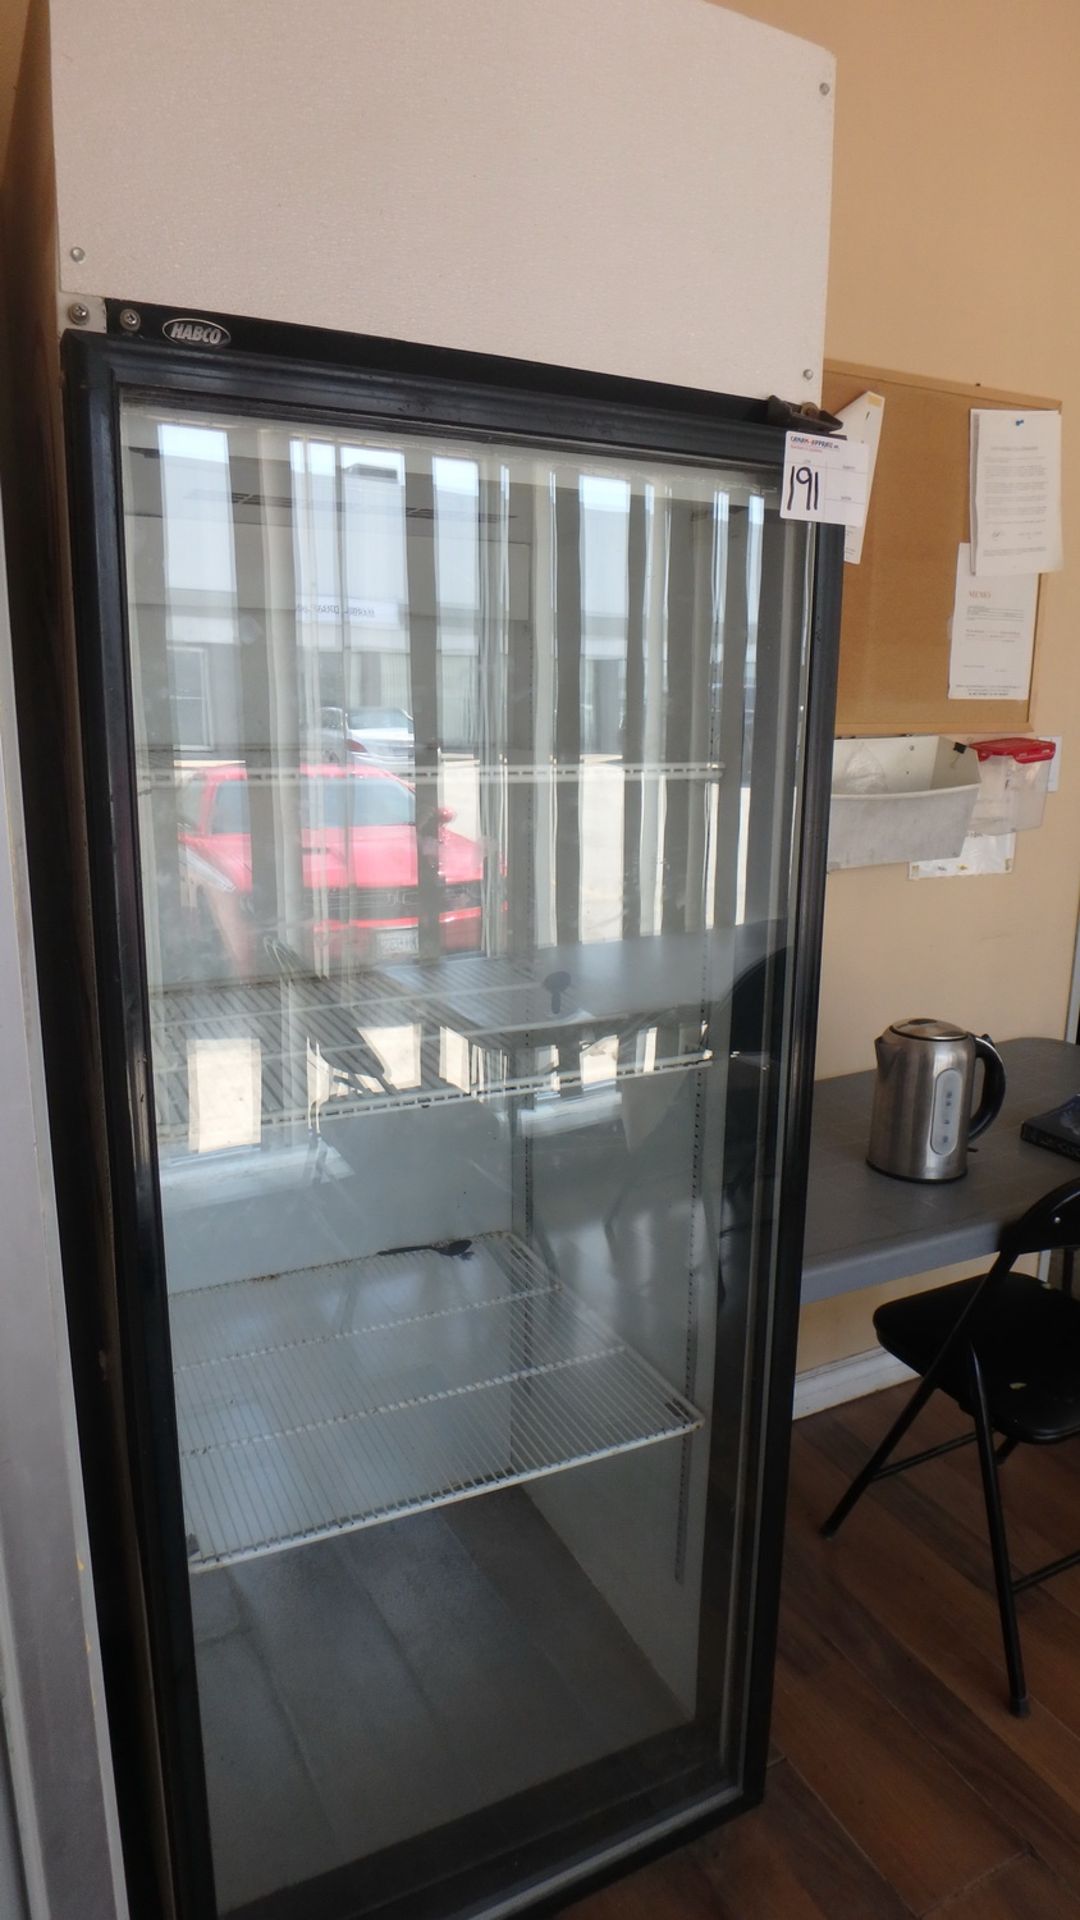 LOT - CONTENTS OF LUNCH ROOM C/O: GLASS DOOR FRIDGE, FOLDING TABLES, CHAIRS, DESK, MICROWAVE, ETC. - Image 2 of 4